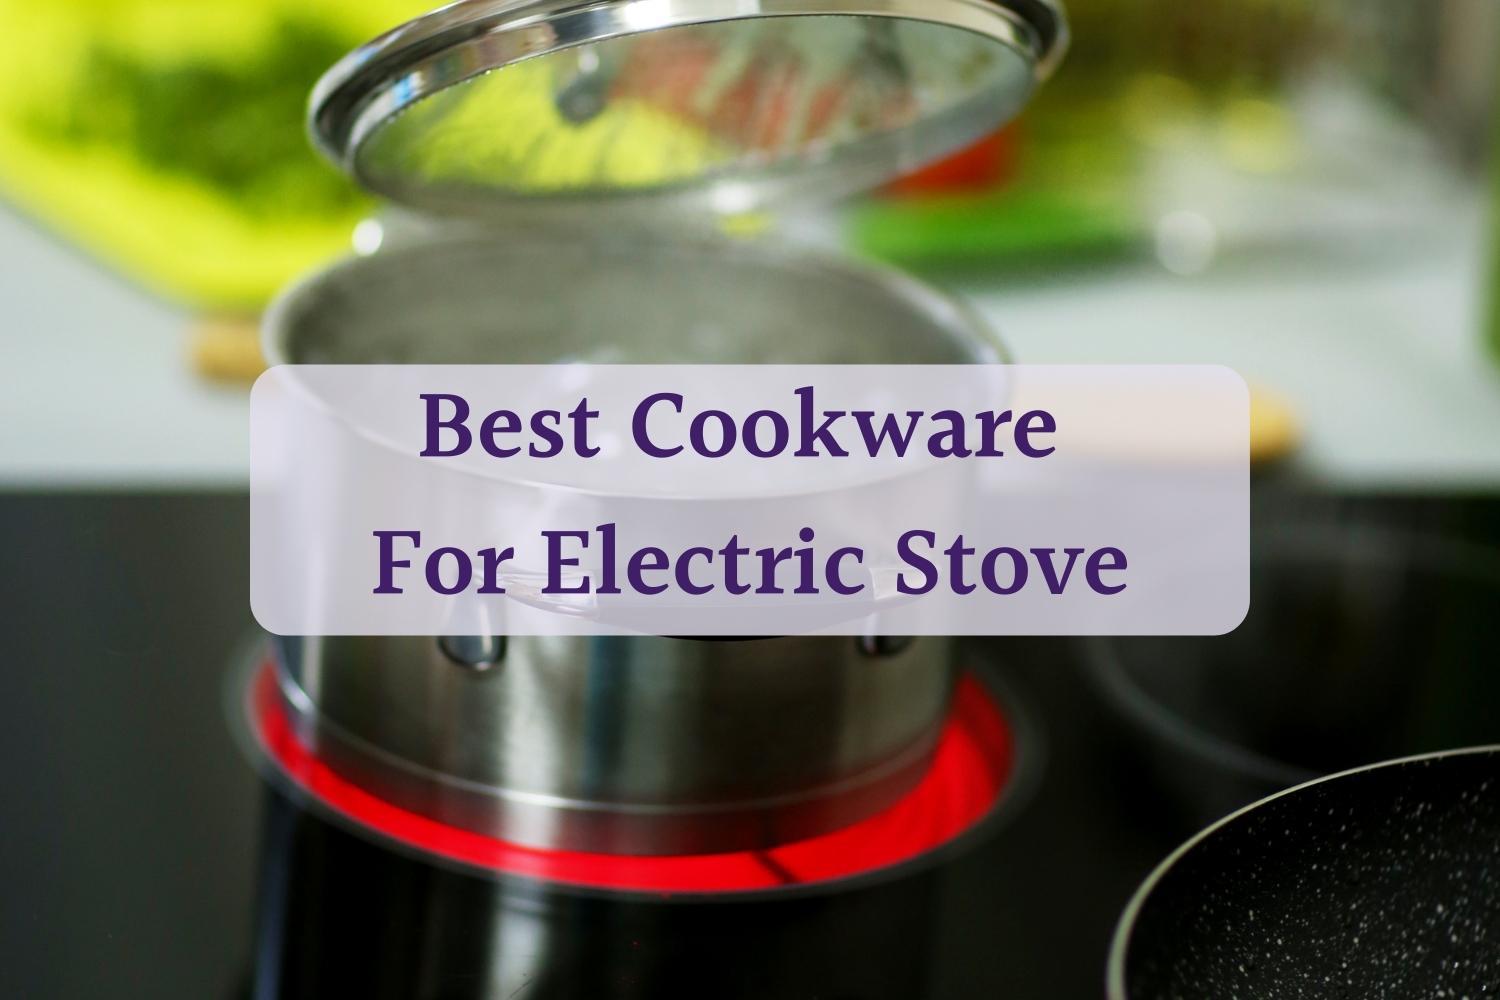 https://clankitchen.com/wp-content/uploads/2021/12/best-cookware-for-electric-stove.jpg